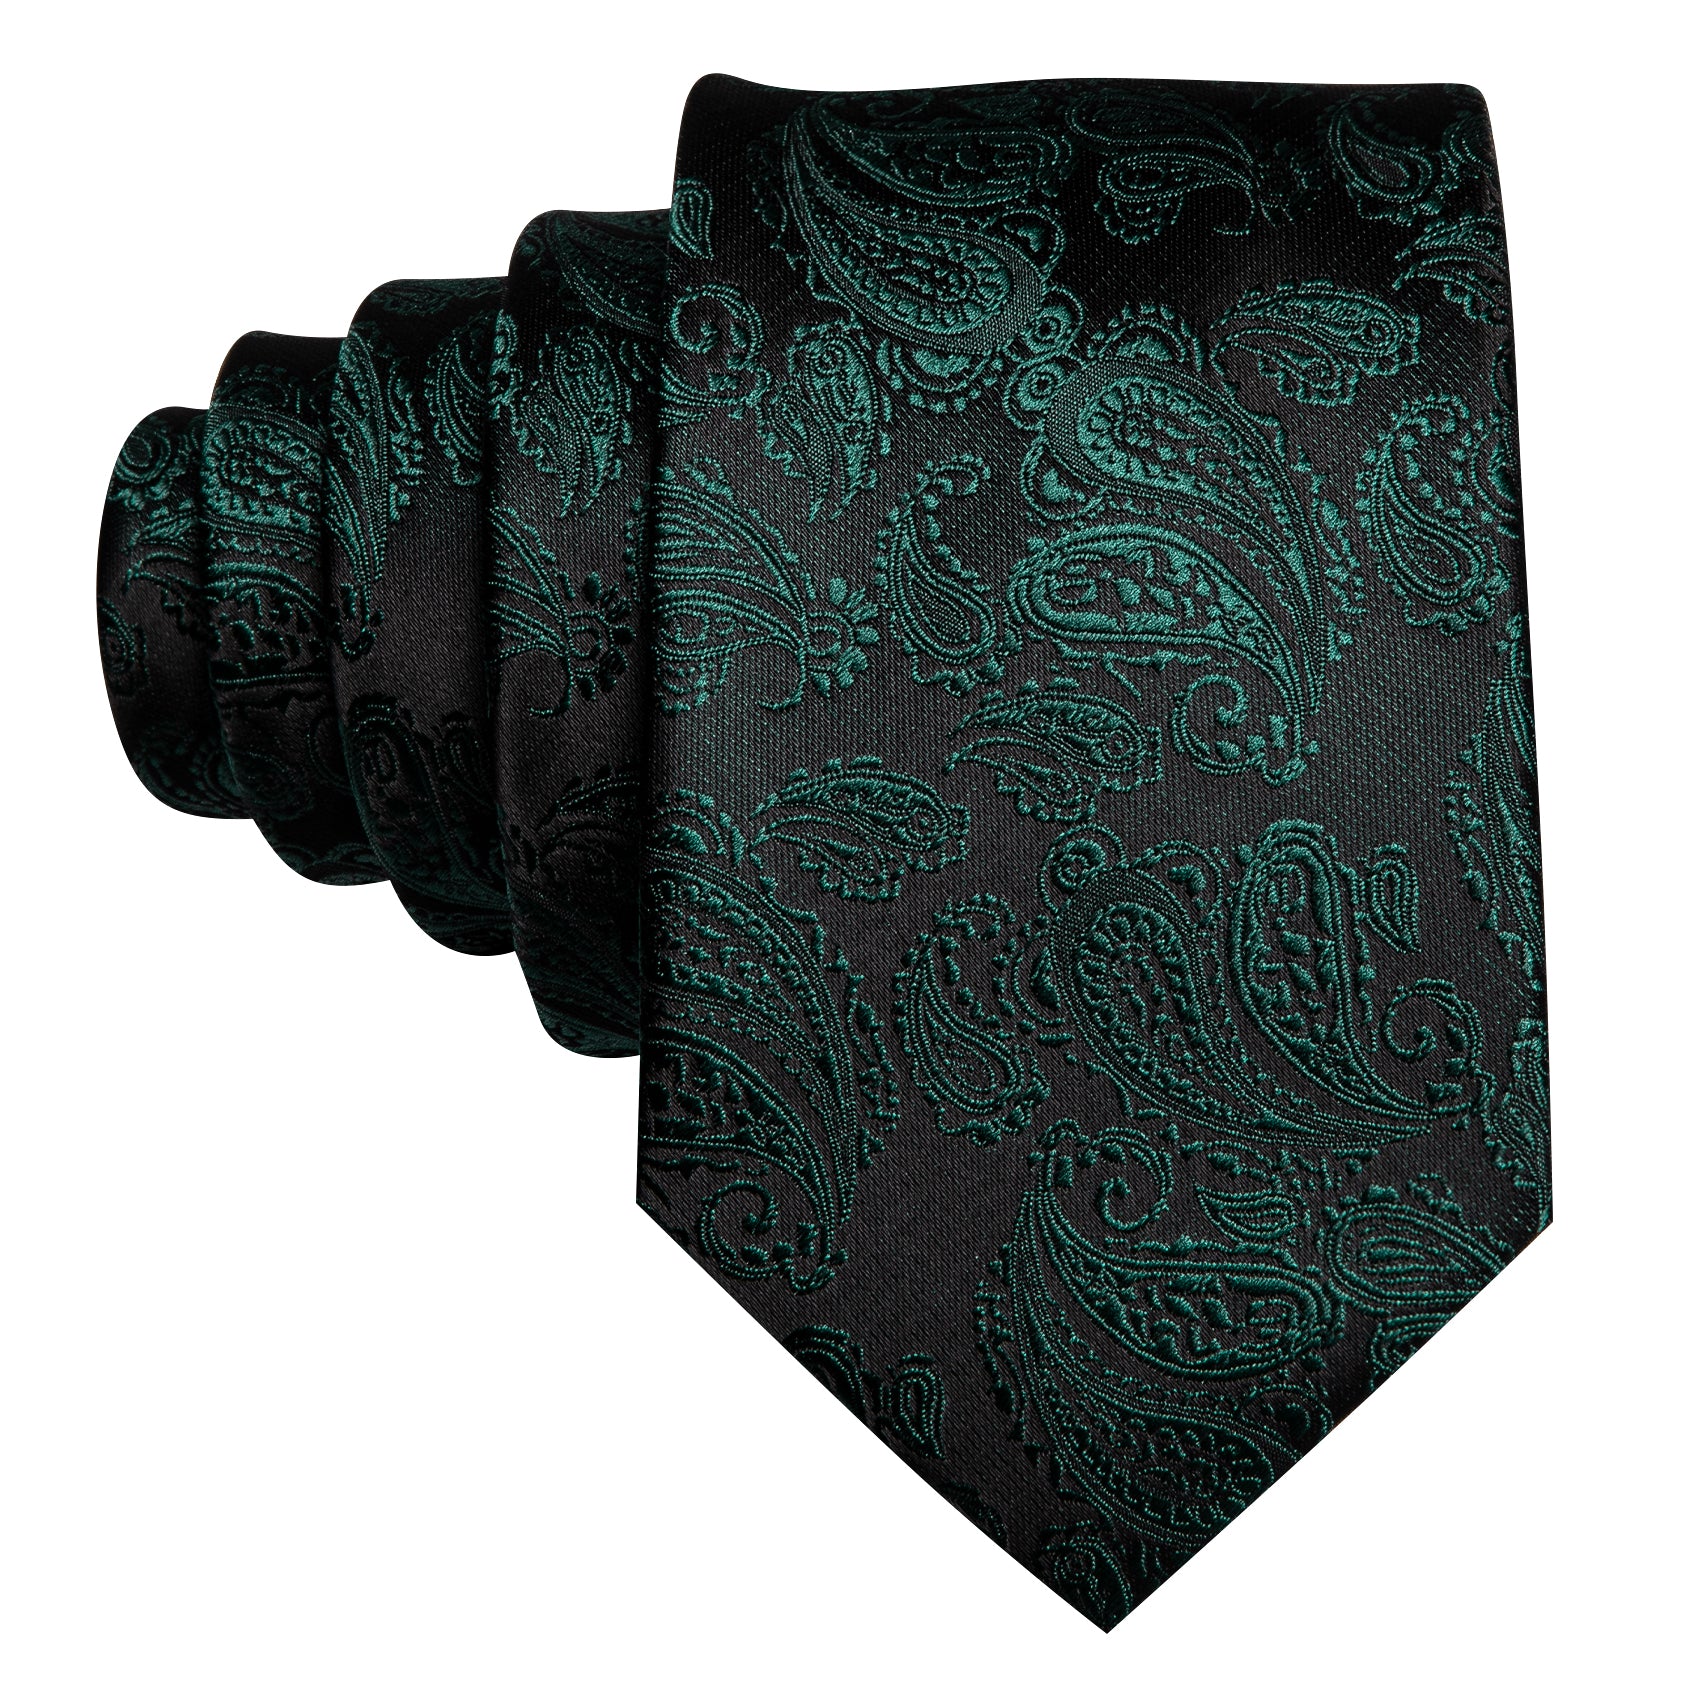 Green Black Paisley Silk 63 Inches Extra Long Tie Pocket Square Cufflinks Set